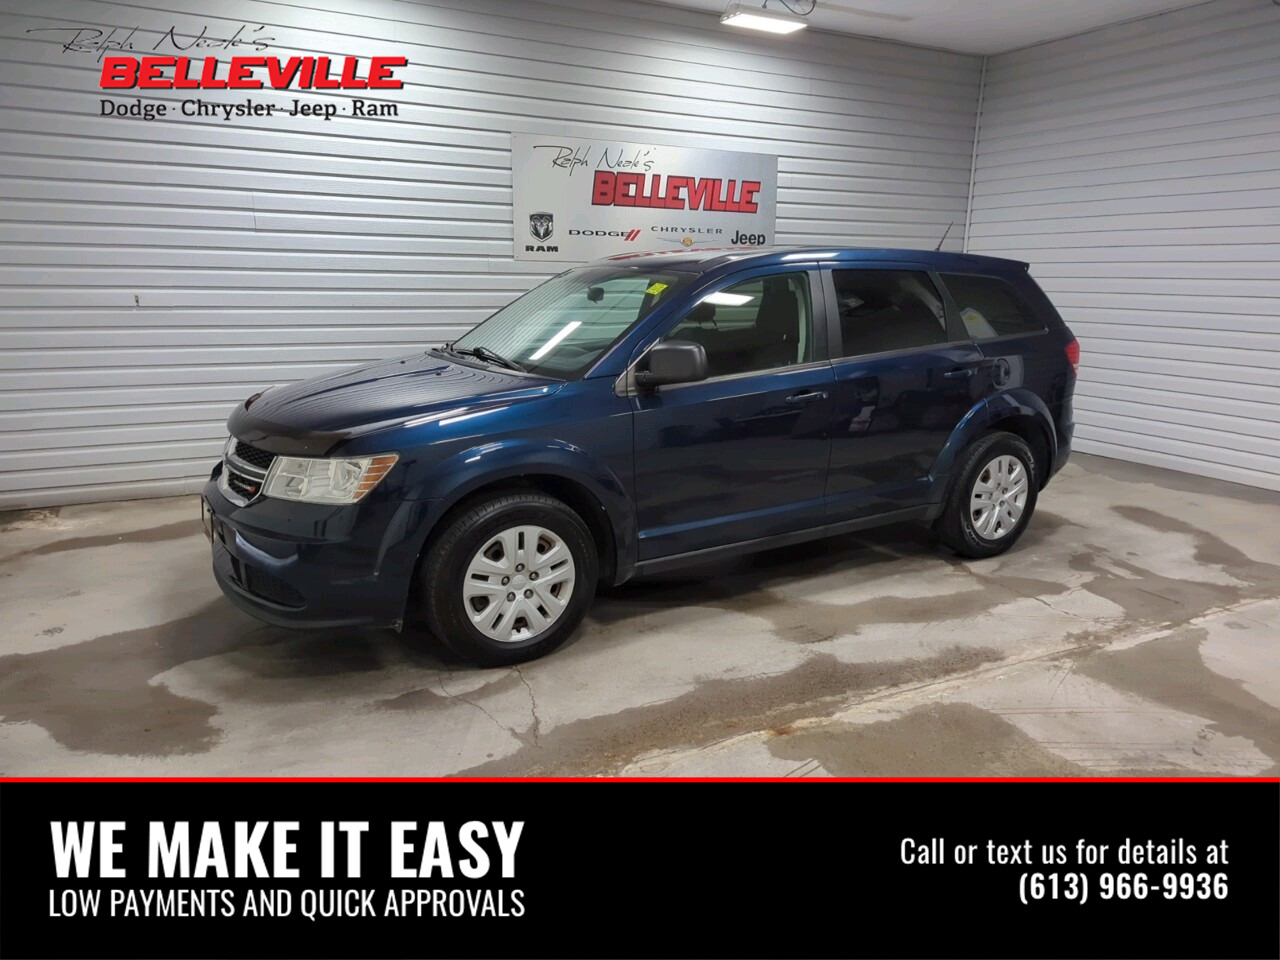 2015 Dodge Journey FWD Journey with Canada Value Package